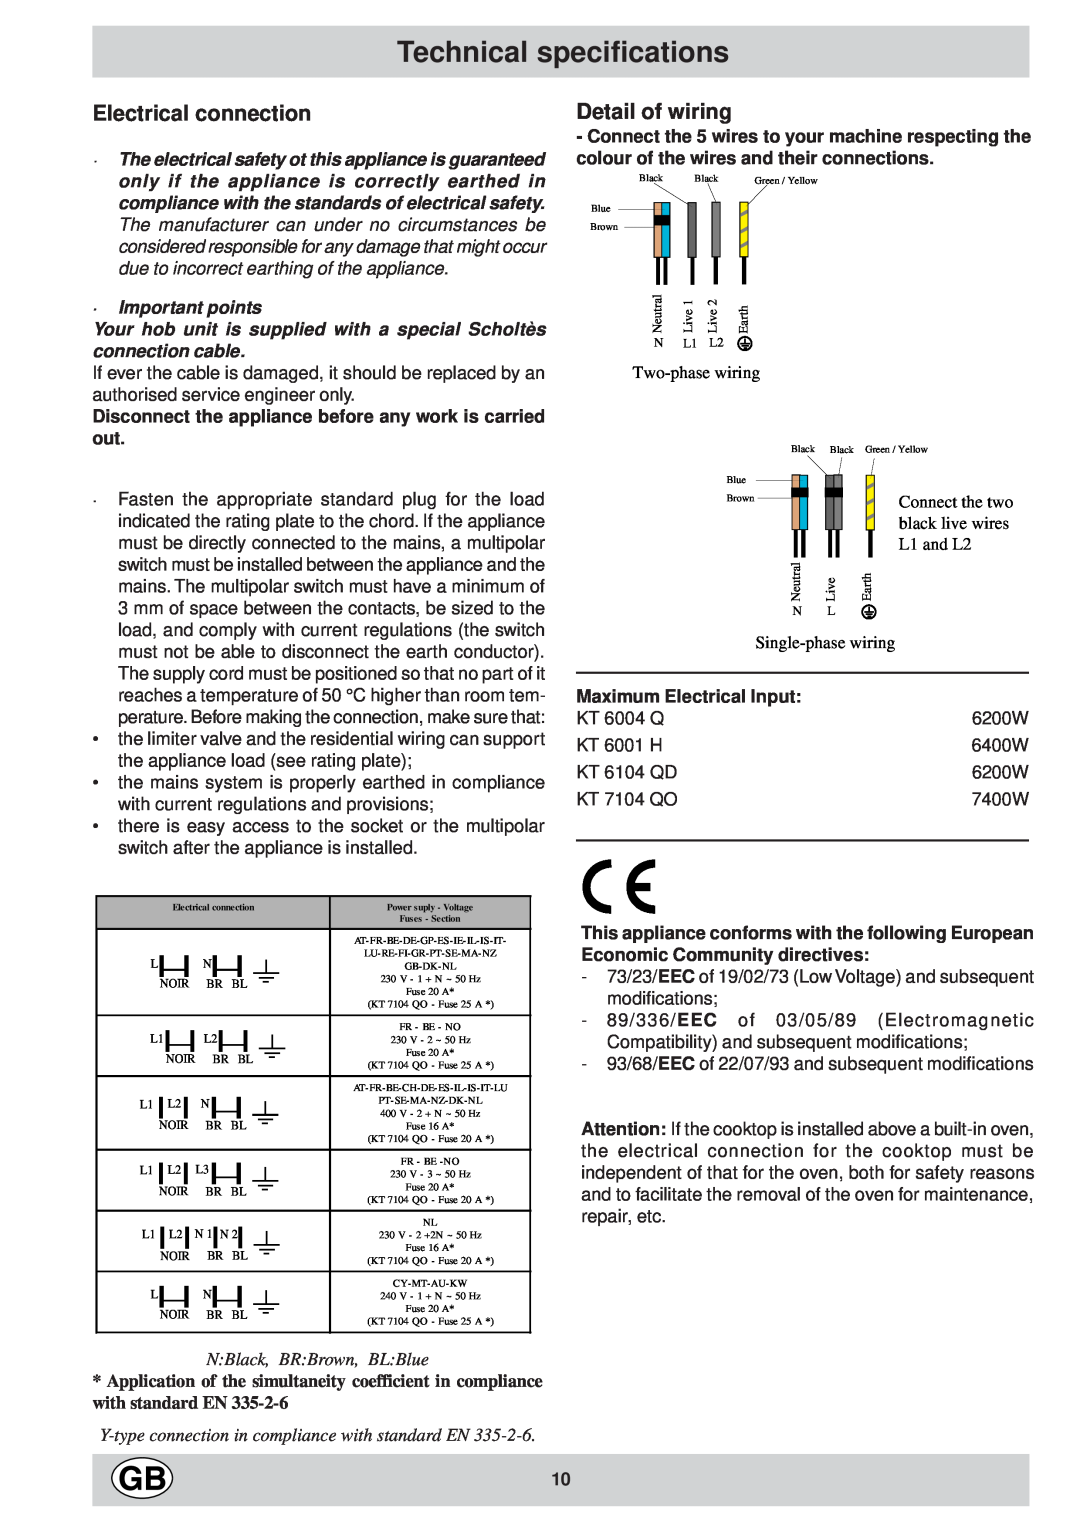 Ariston KT 8104 QO manual Technical specifications, Electrical connection, Detail of wiring, Maximum Electrical Input 